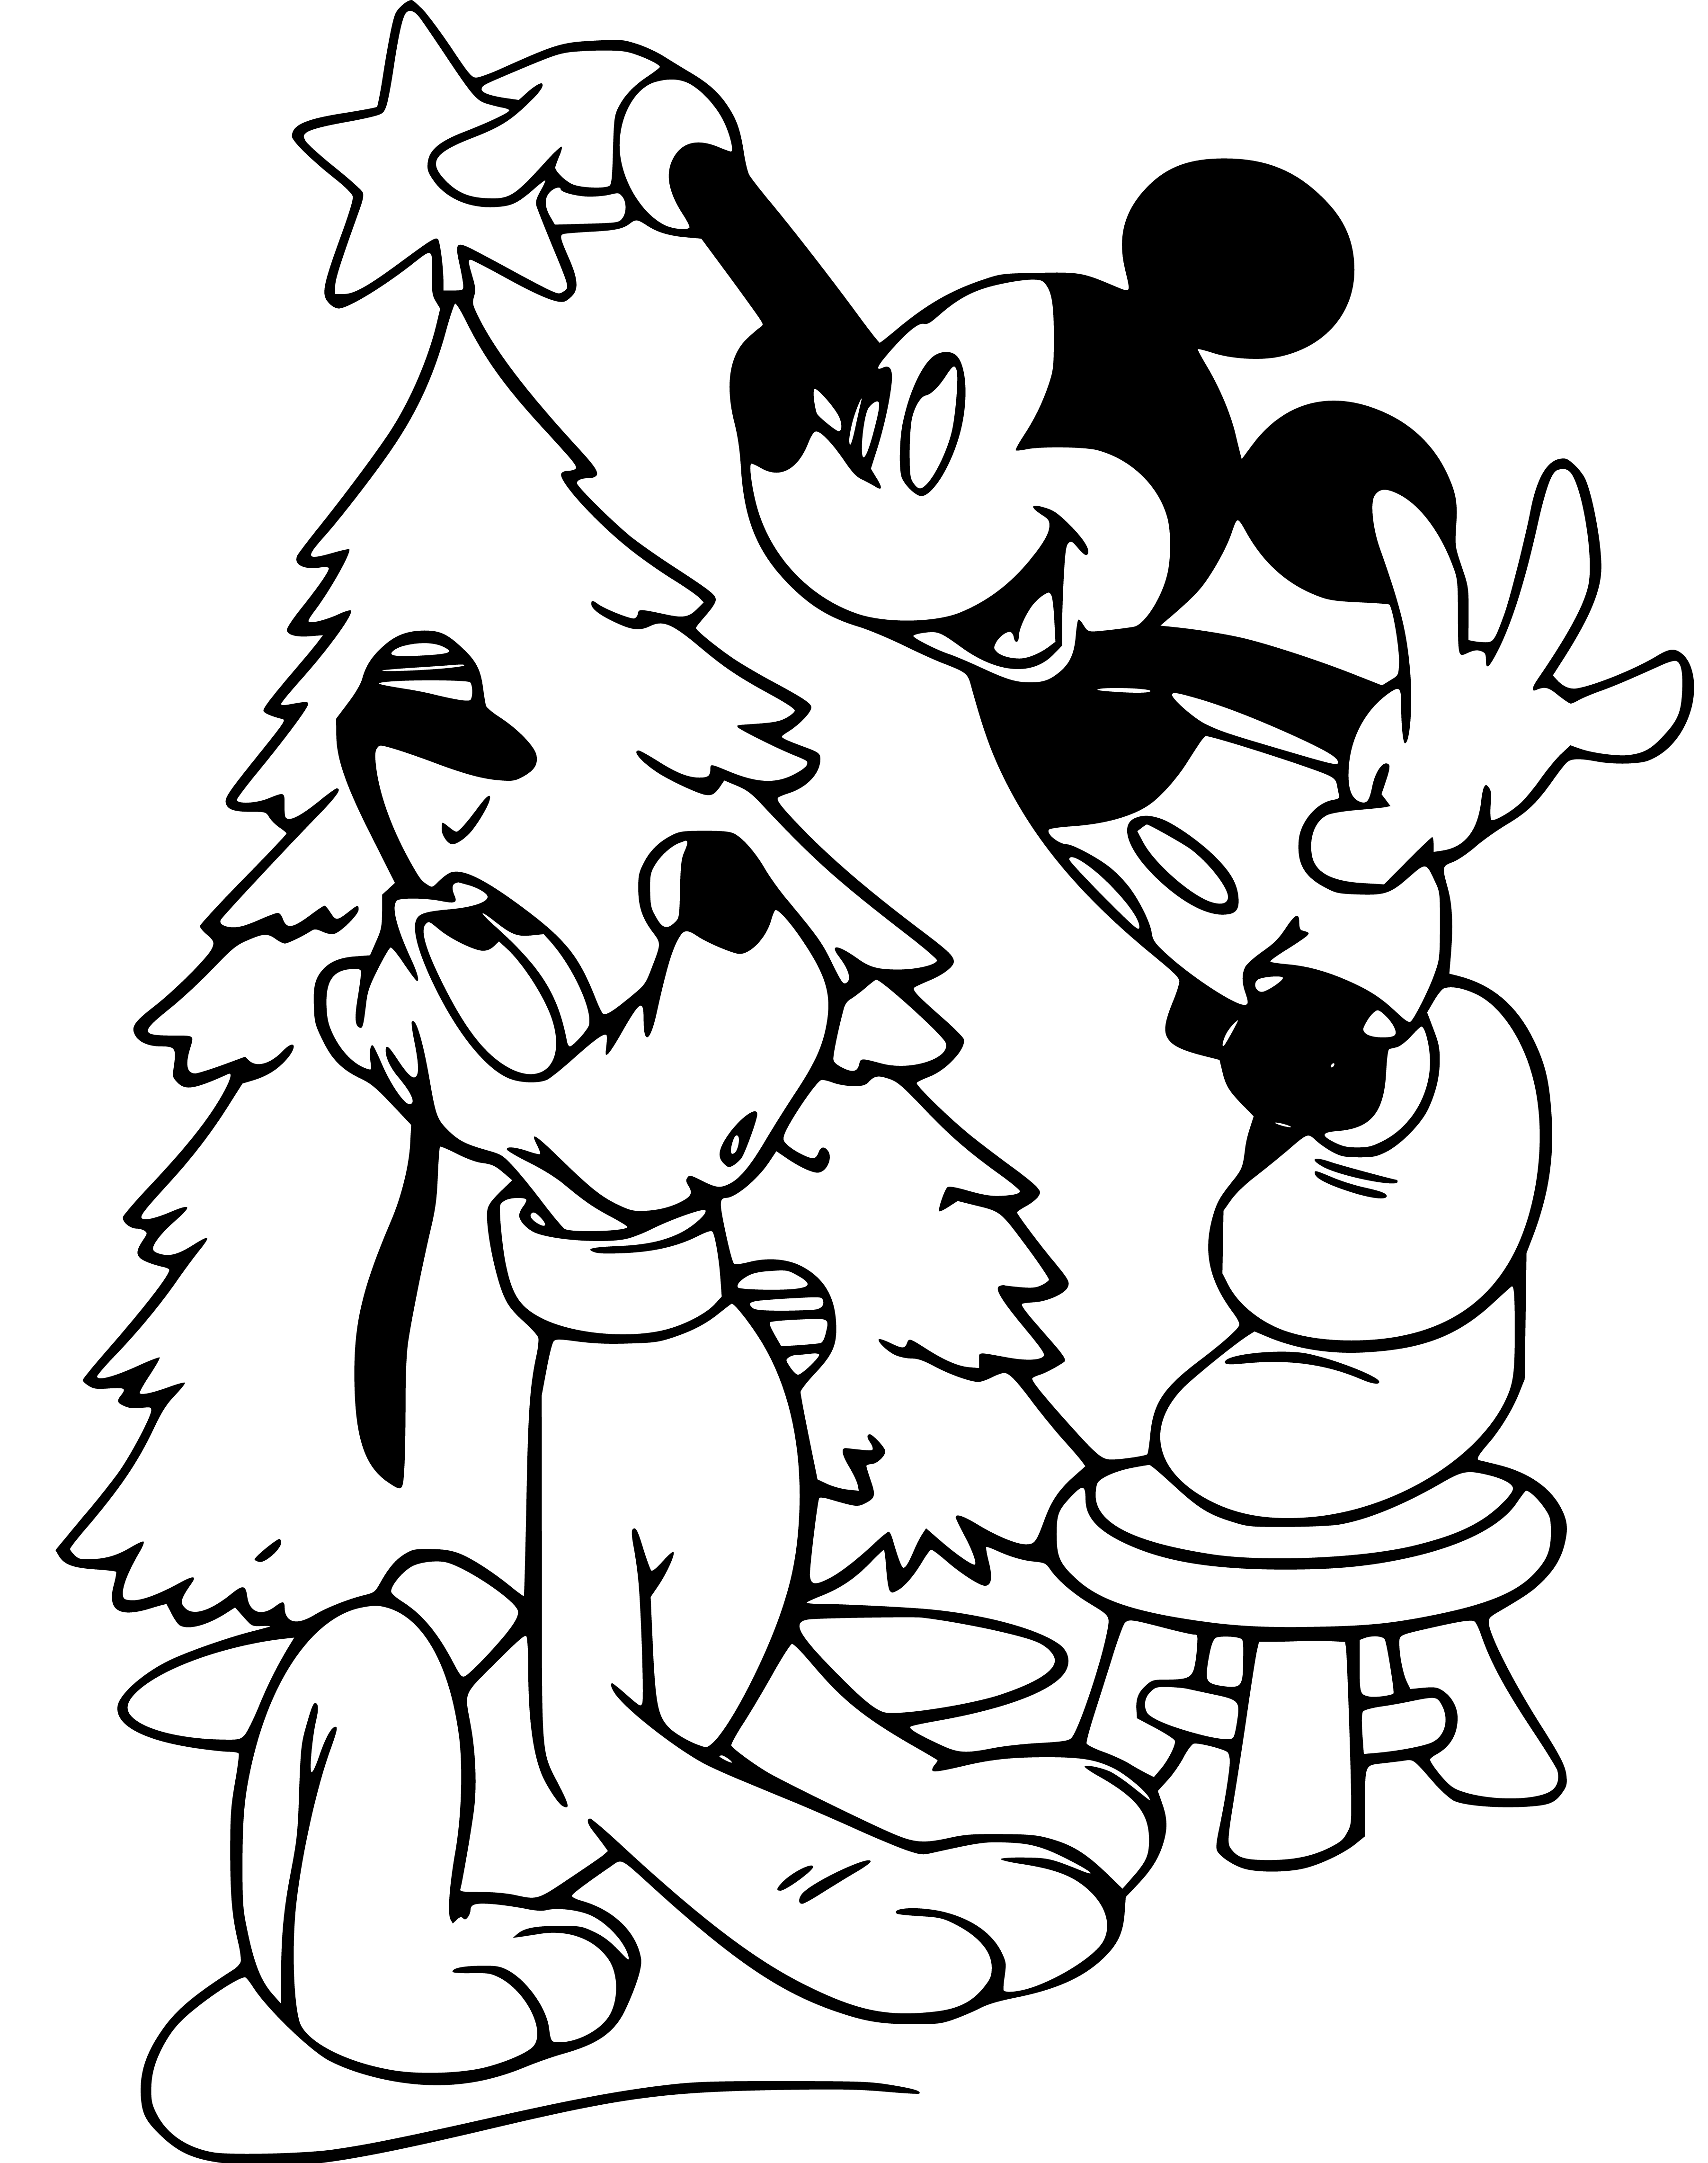 Mickey and Pluto Christmas Tree Coloring Page for Children - SheetalColor.com